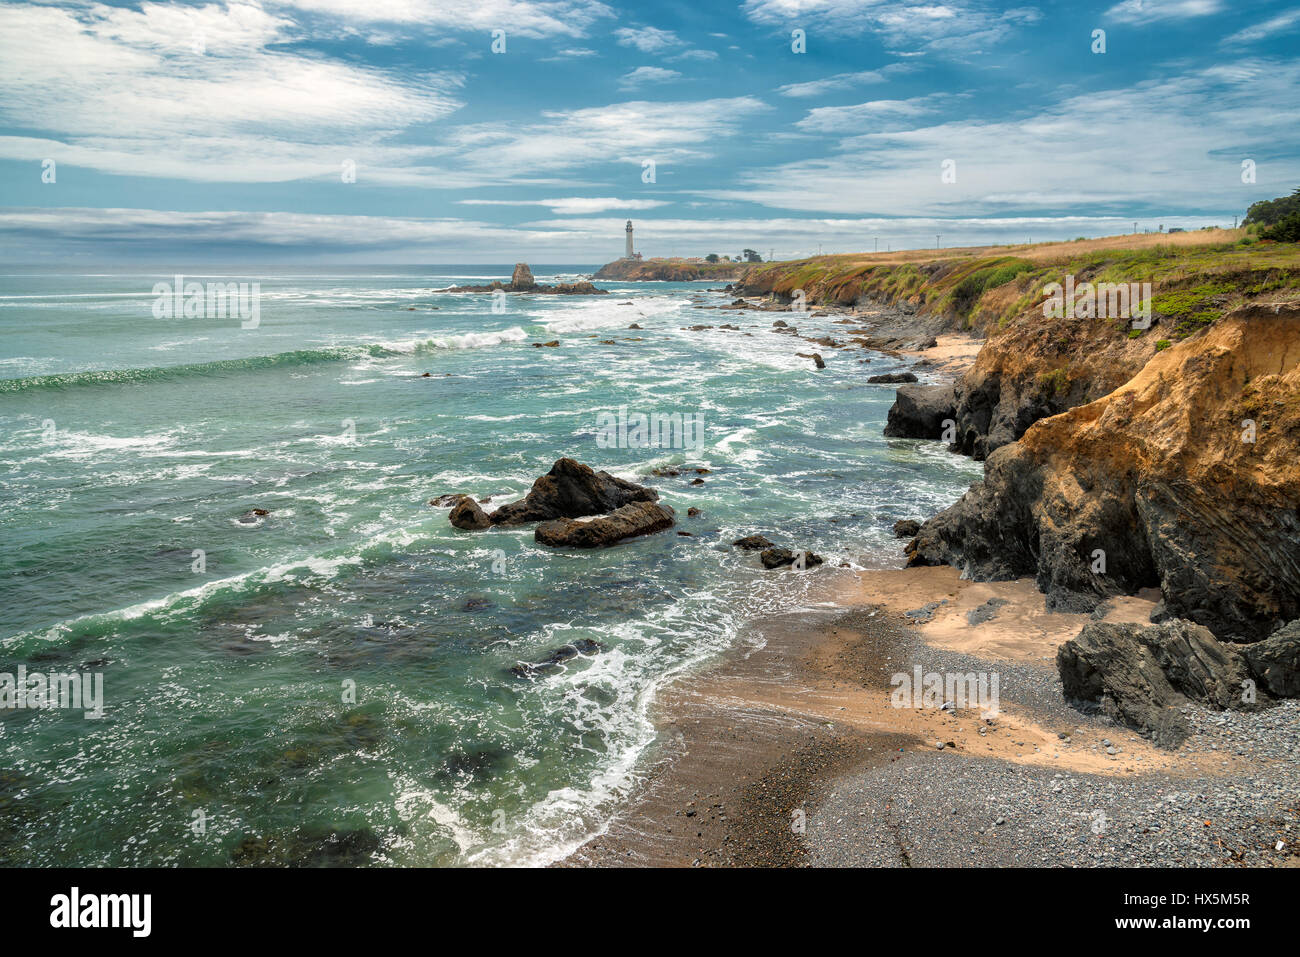 California coast and Pigeon Point Lighthouse. Stock Photo